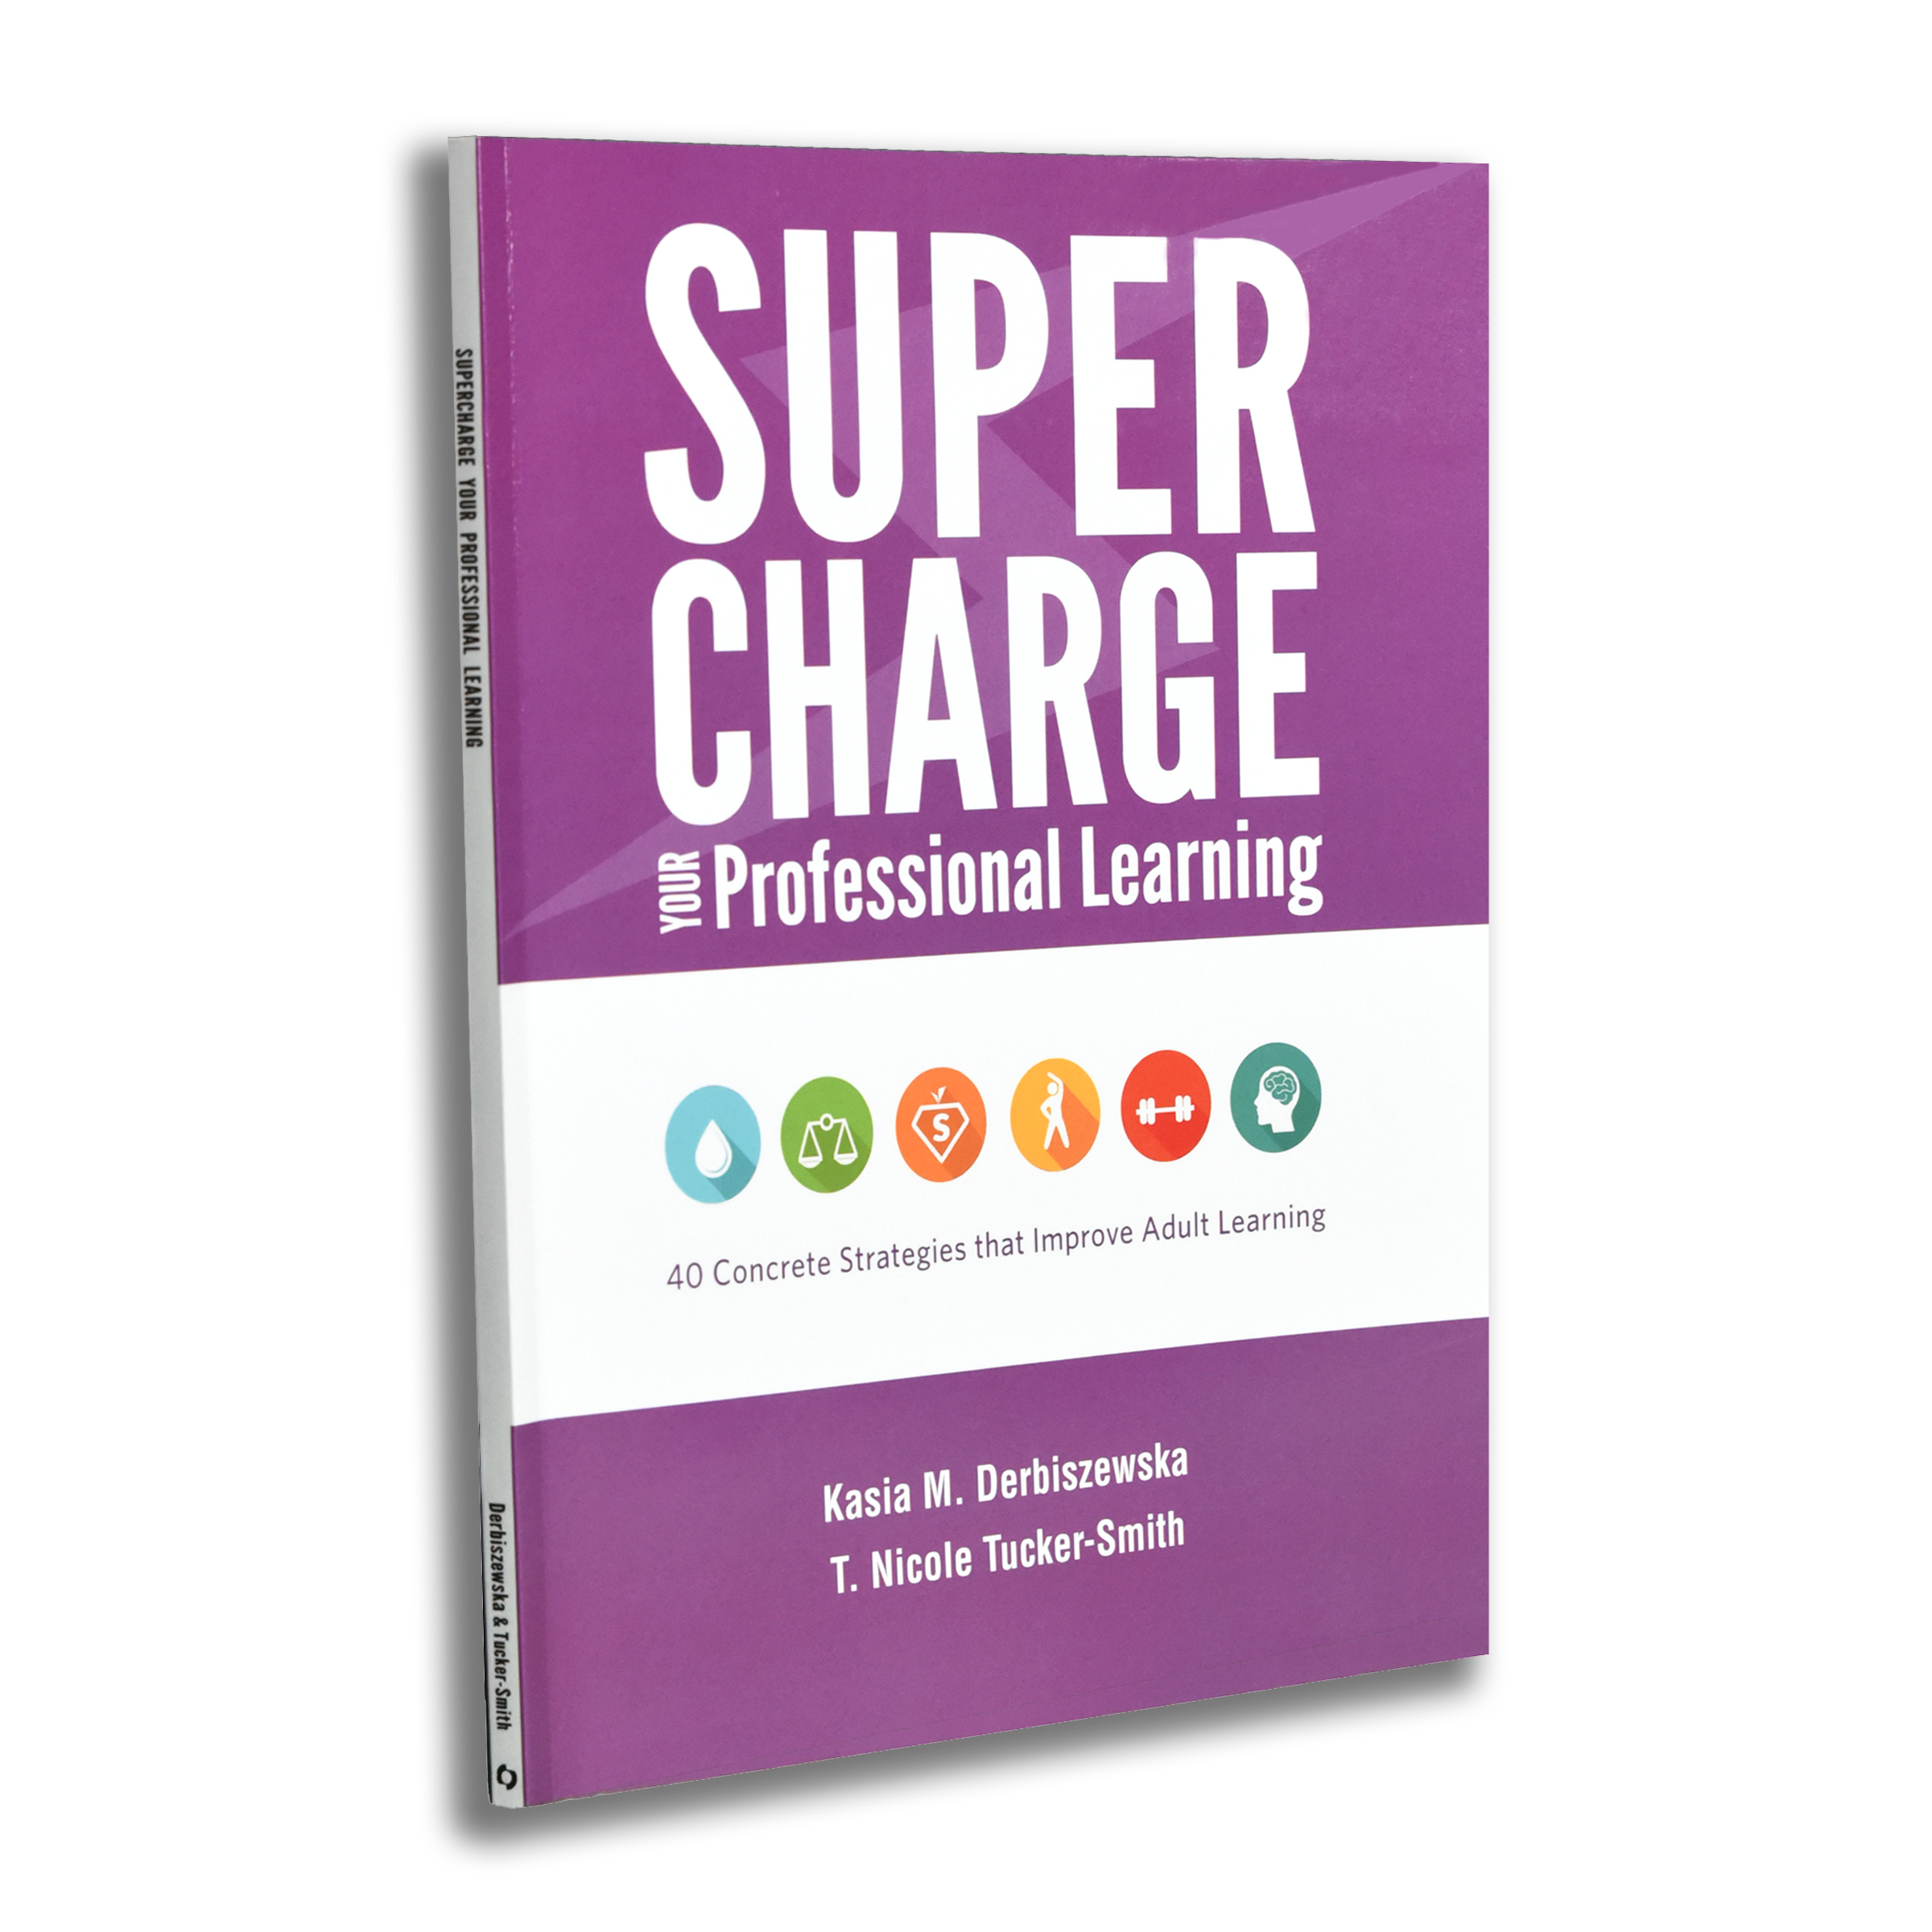 Image of the book Supercharge Your Professional Learning.